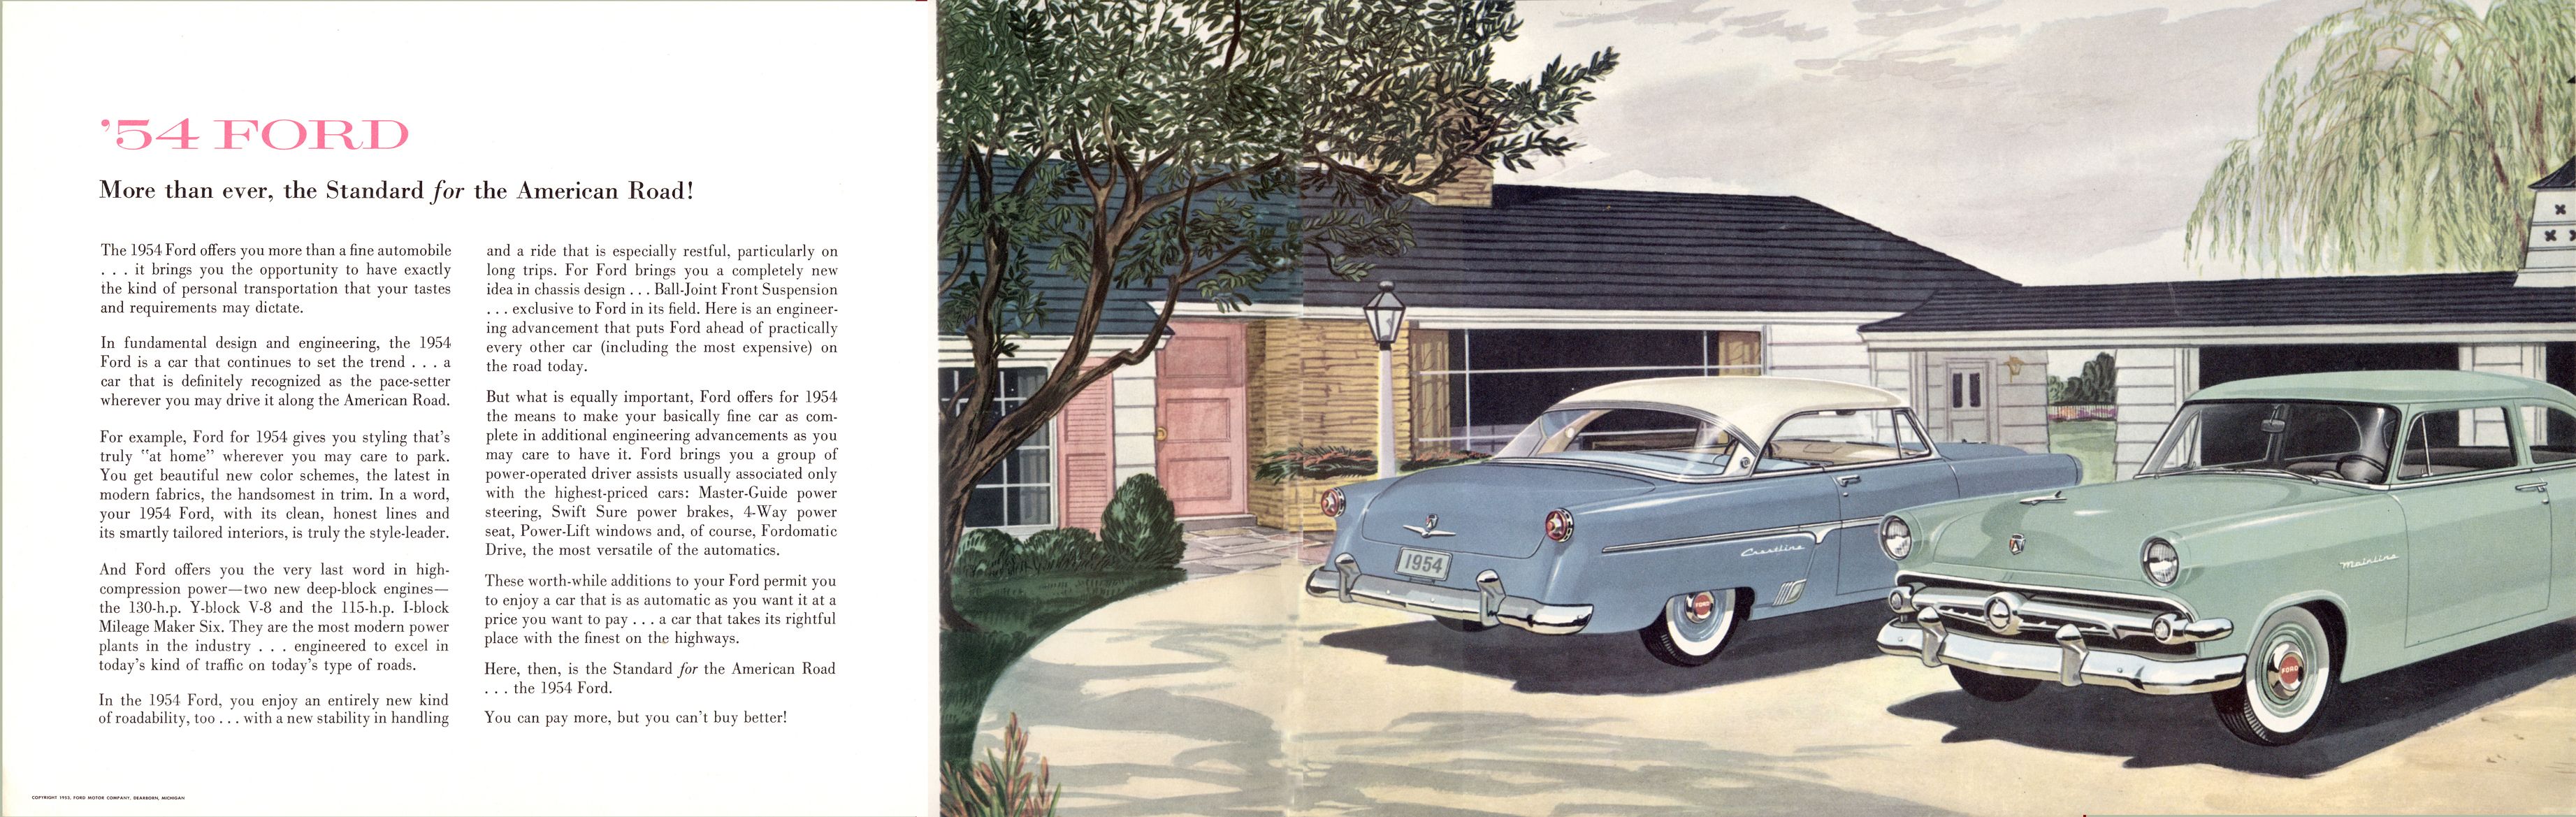 1954 Ford Brochure Page 5